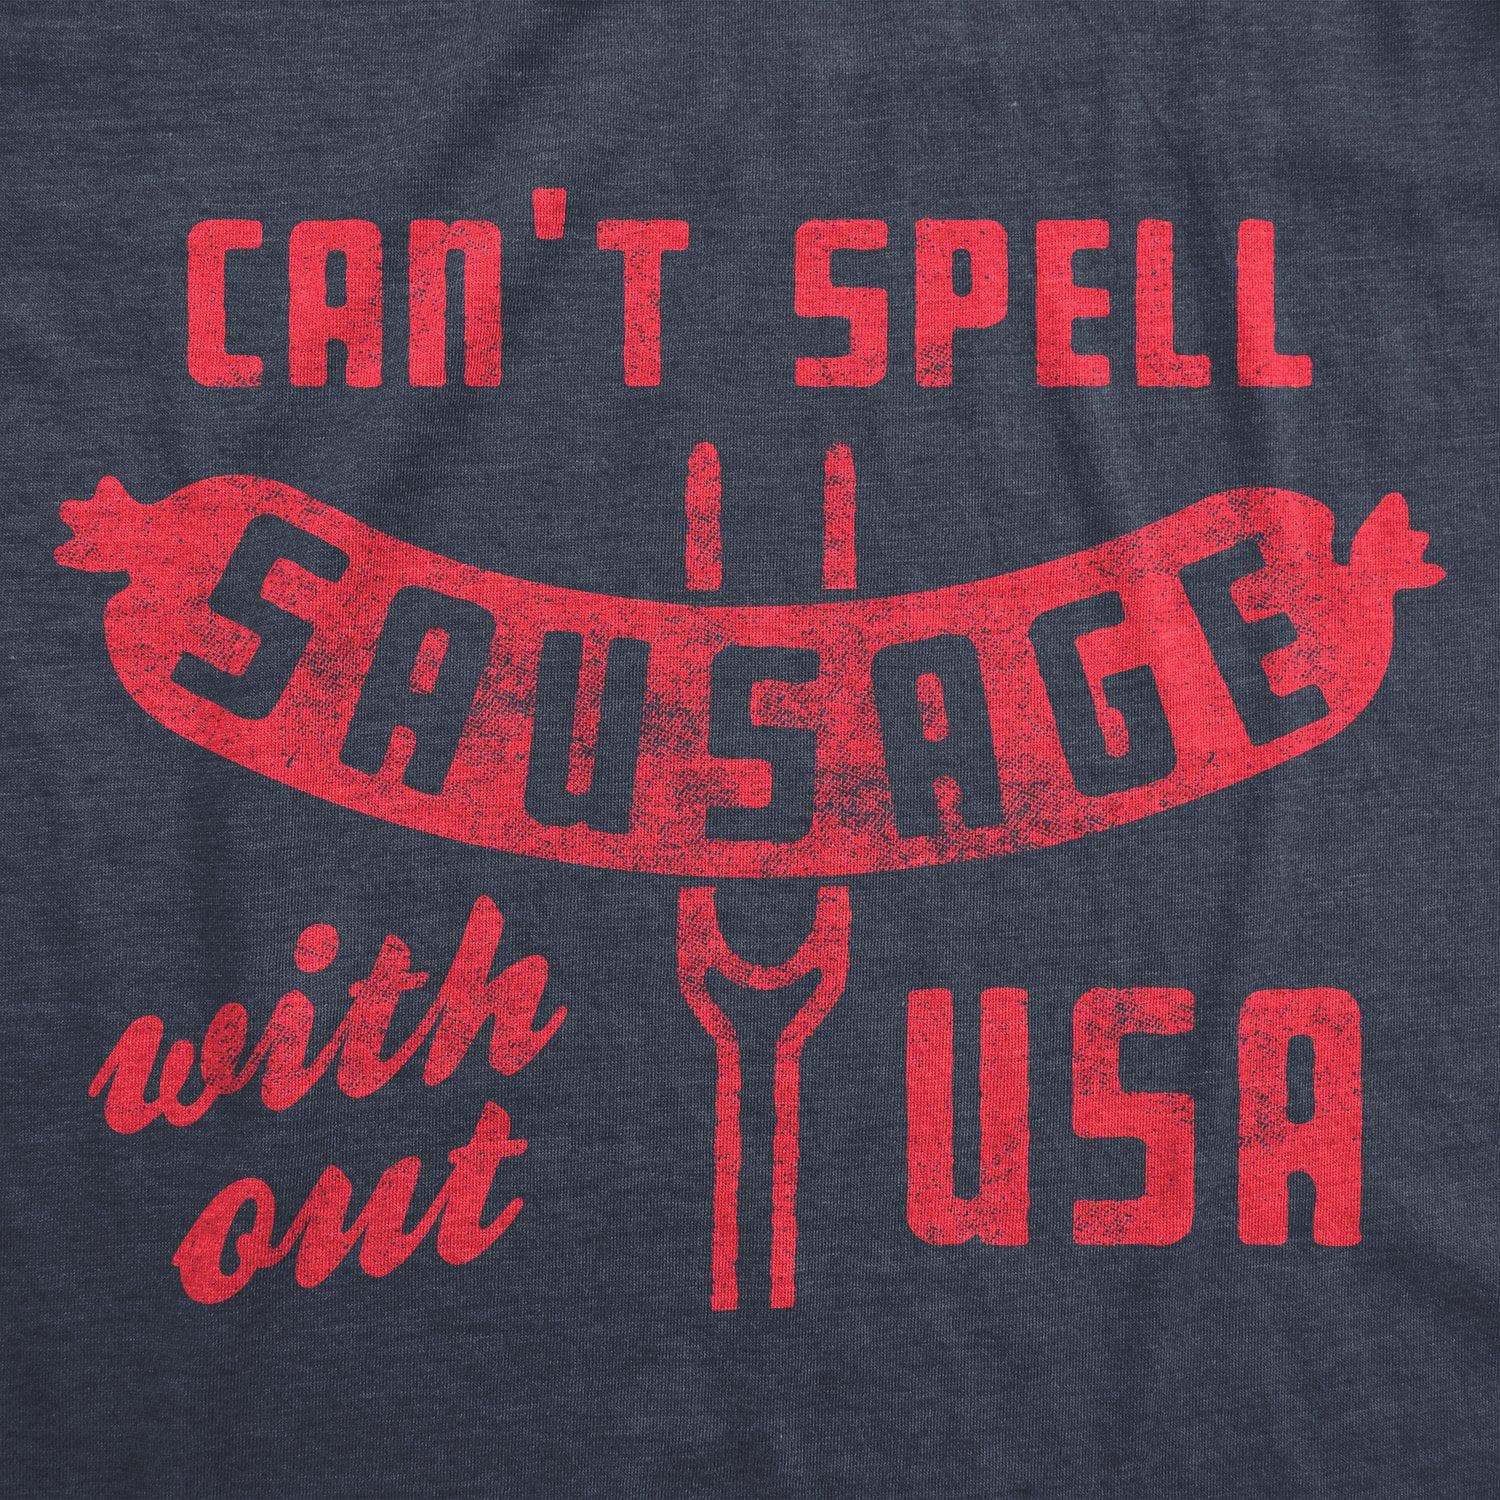 Can't Spell Sausage Without USA Men's Tshirt - Crazy Dog T-Shirts